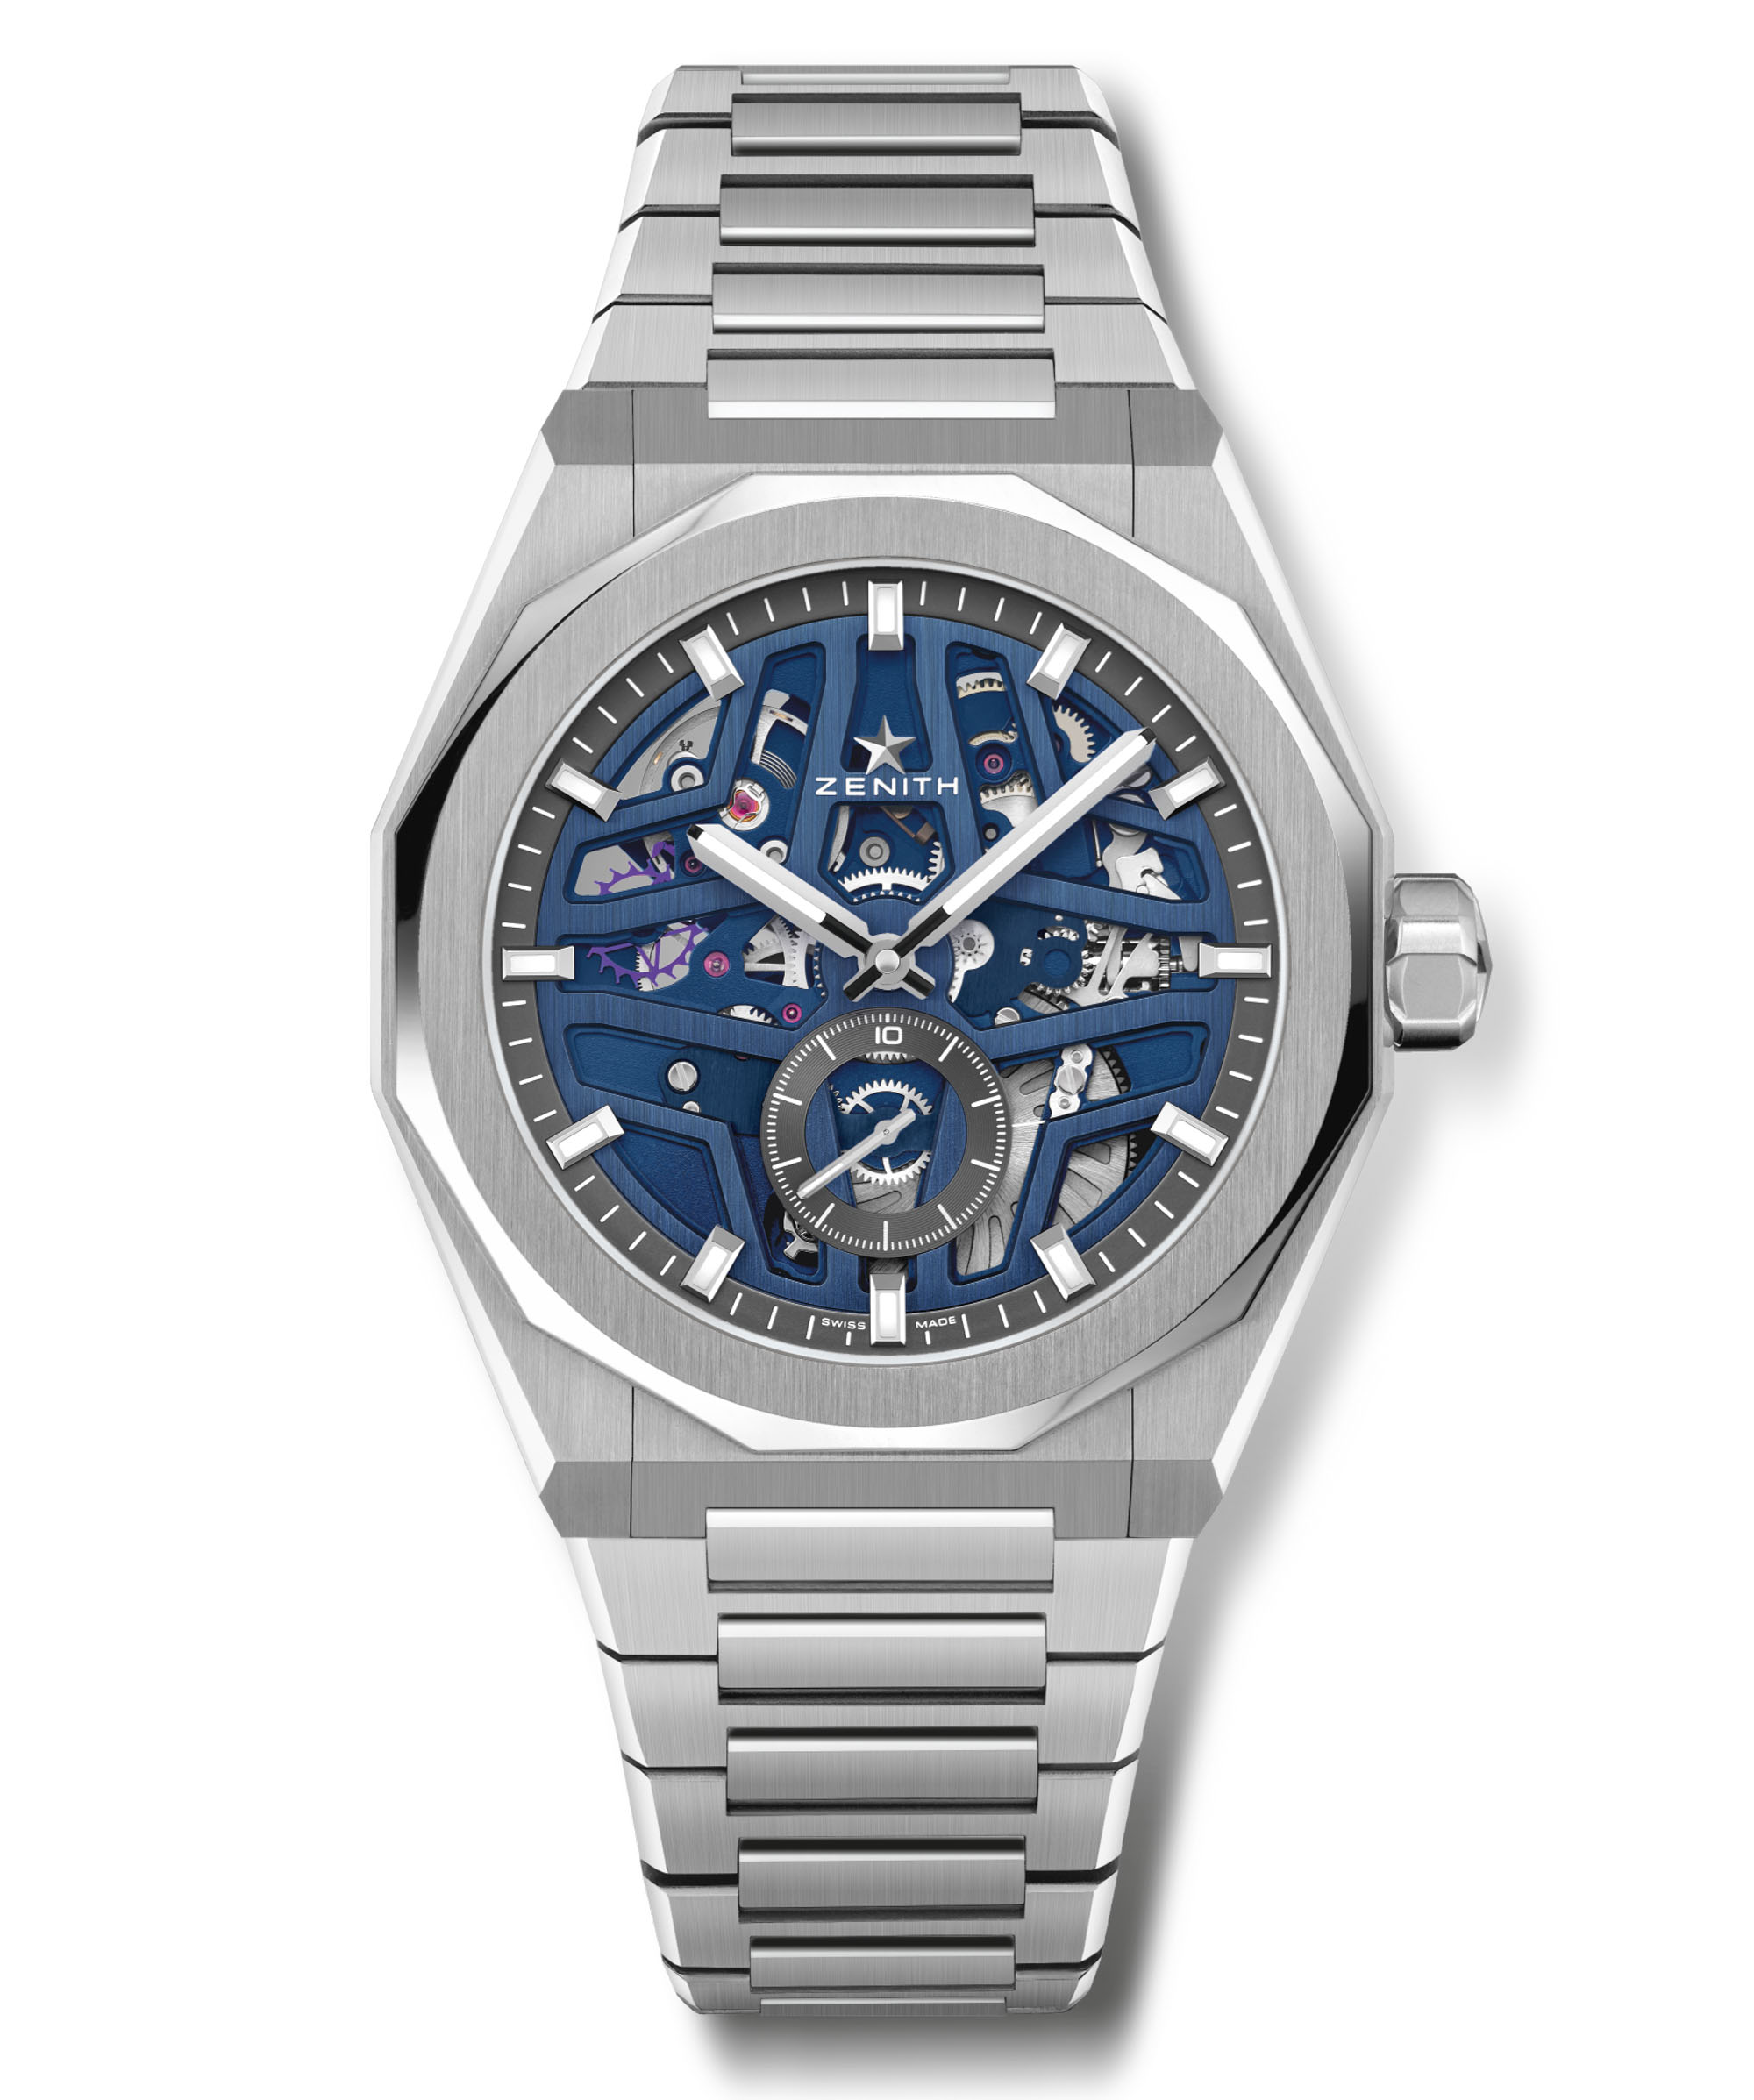 The new Zenith Defy Skyline Skeleton - Today on the wrist - An online  magazine about watches